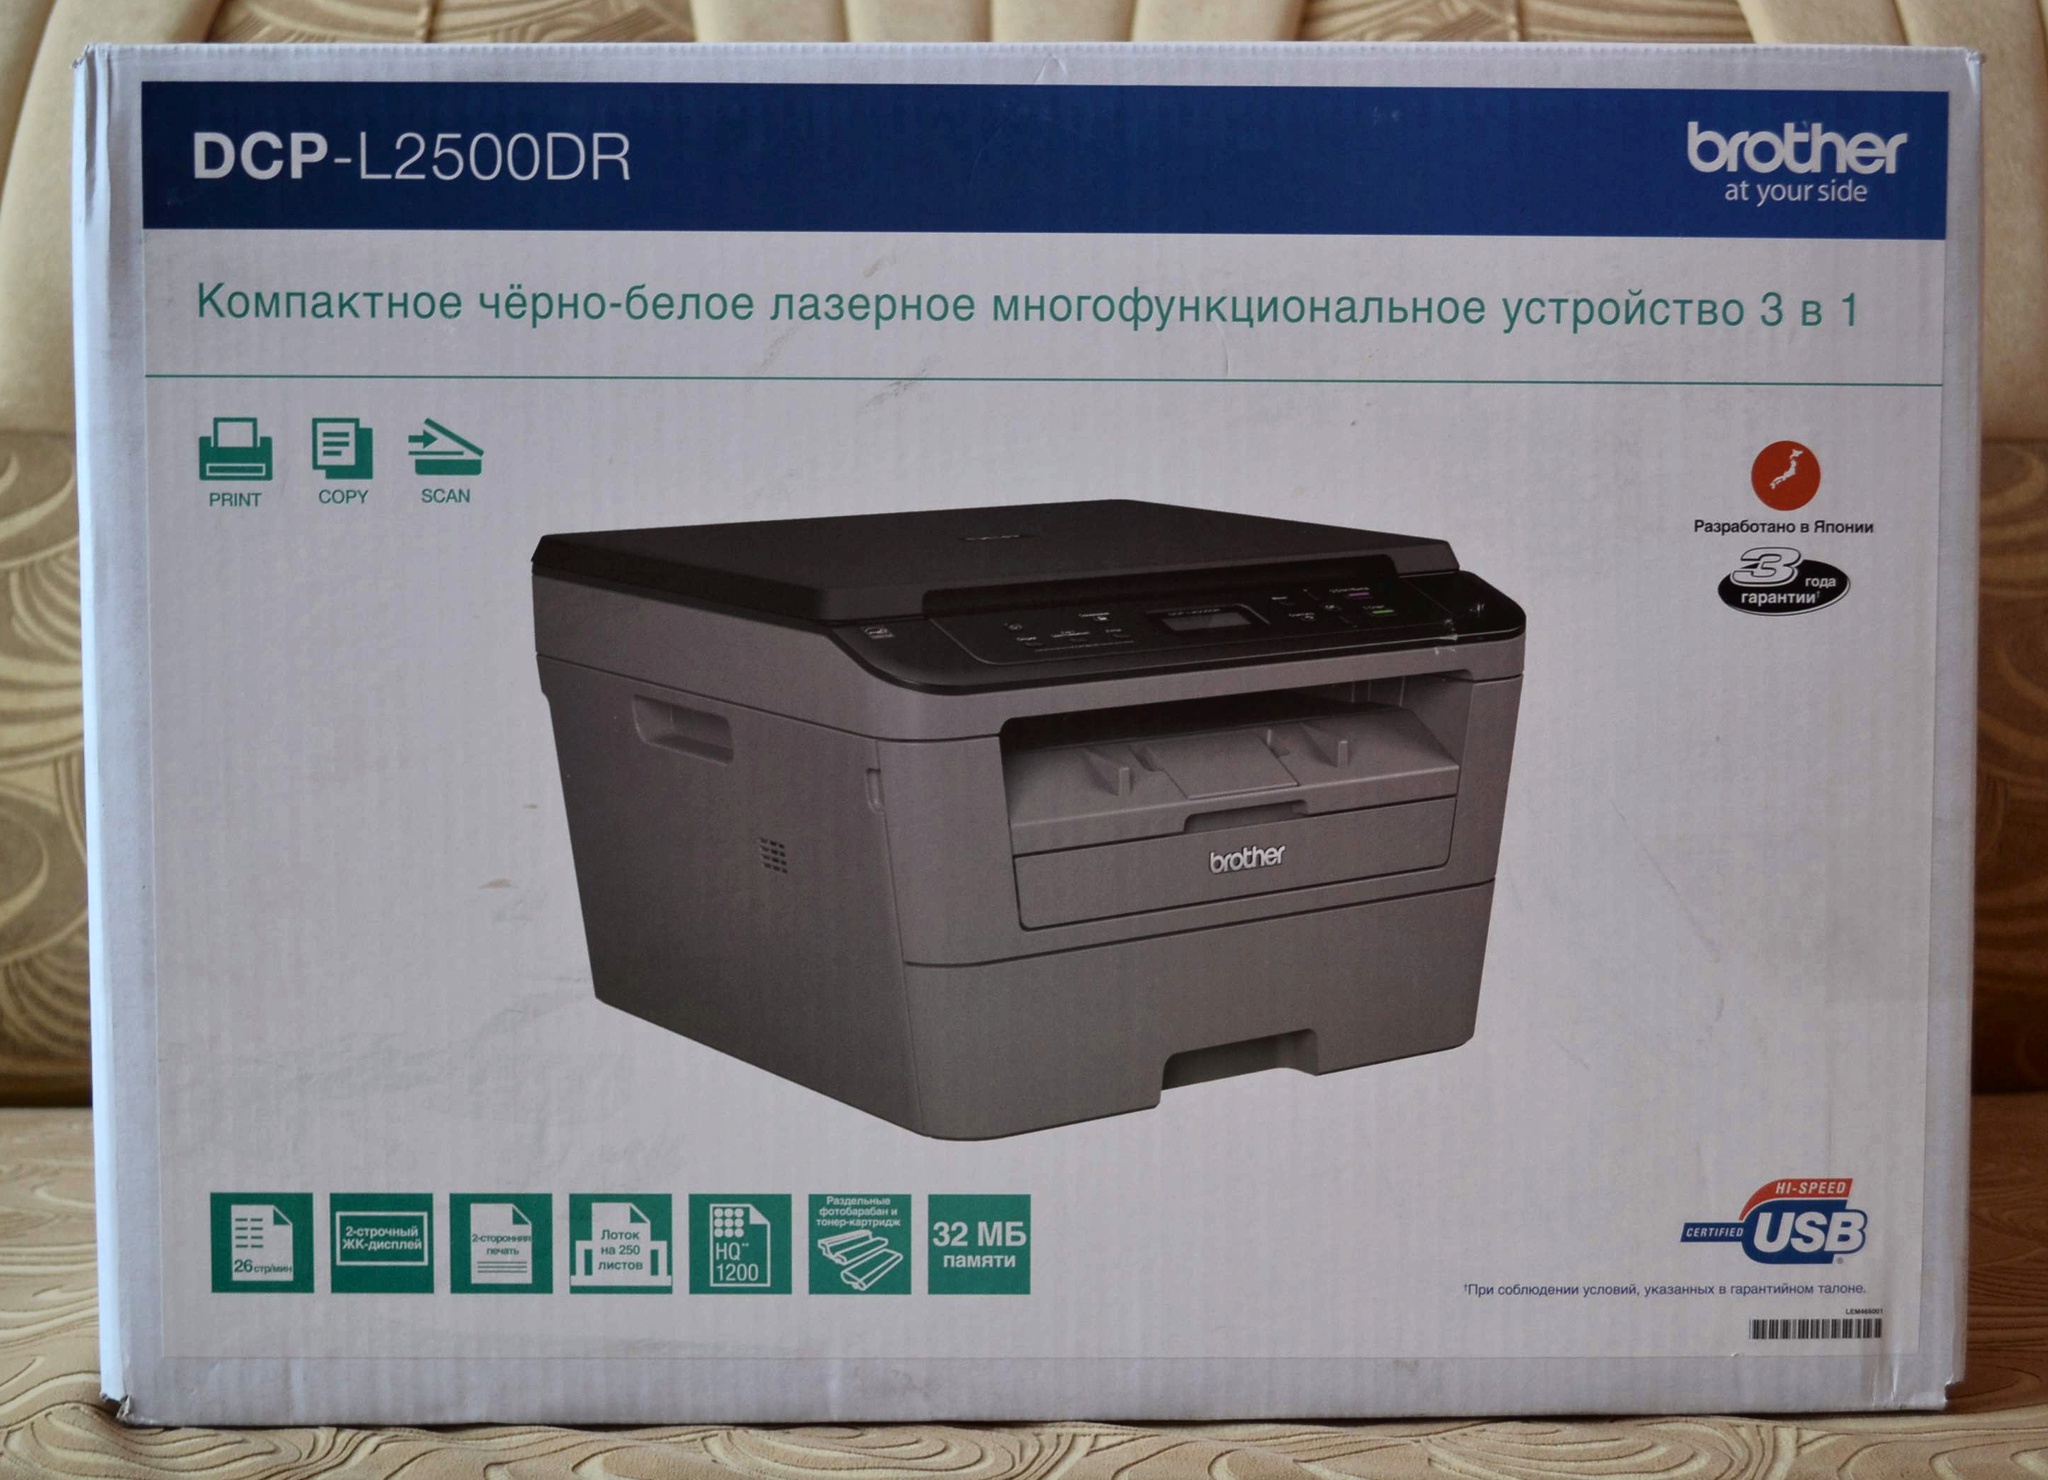 Brother l2500. Принтер Бразер DCP l2500dr. МФУ brother DCP-l2500dr. МФУ Бразер 2500 Dr. Brother DCP 2500.